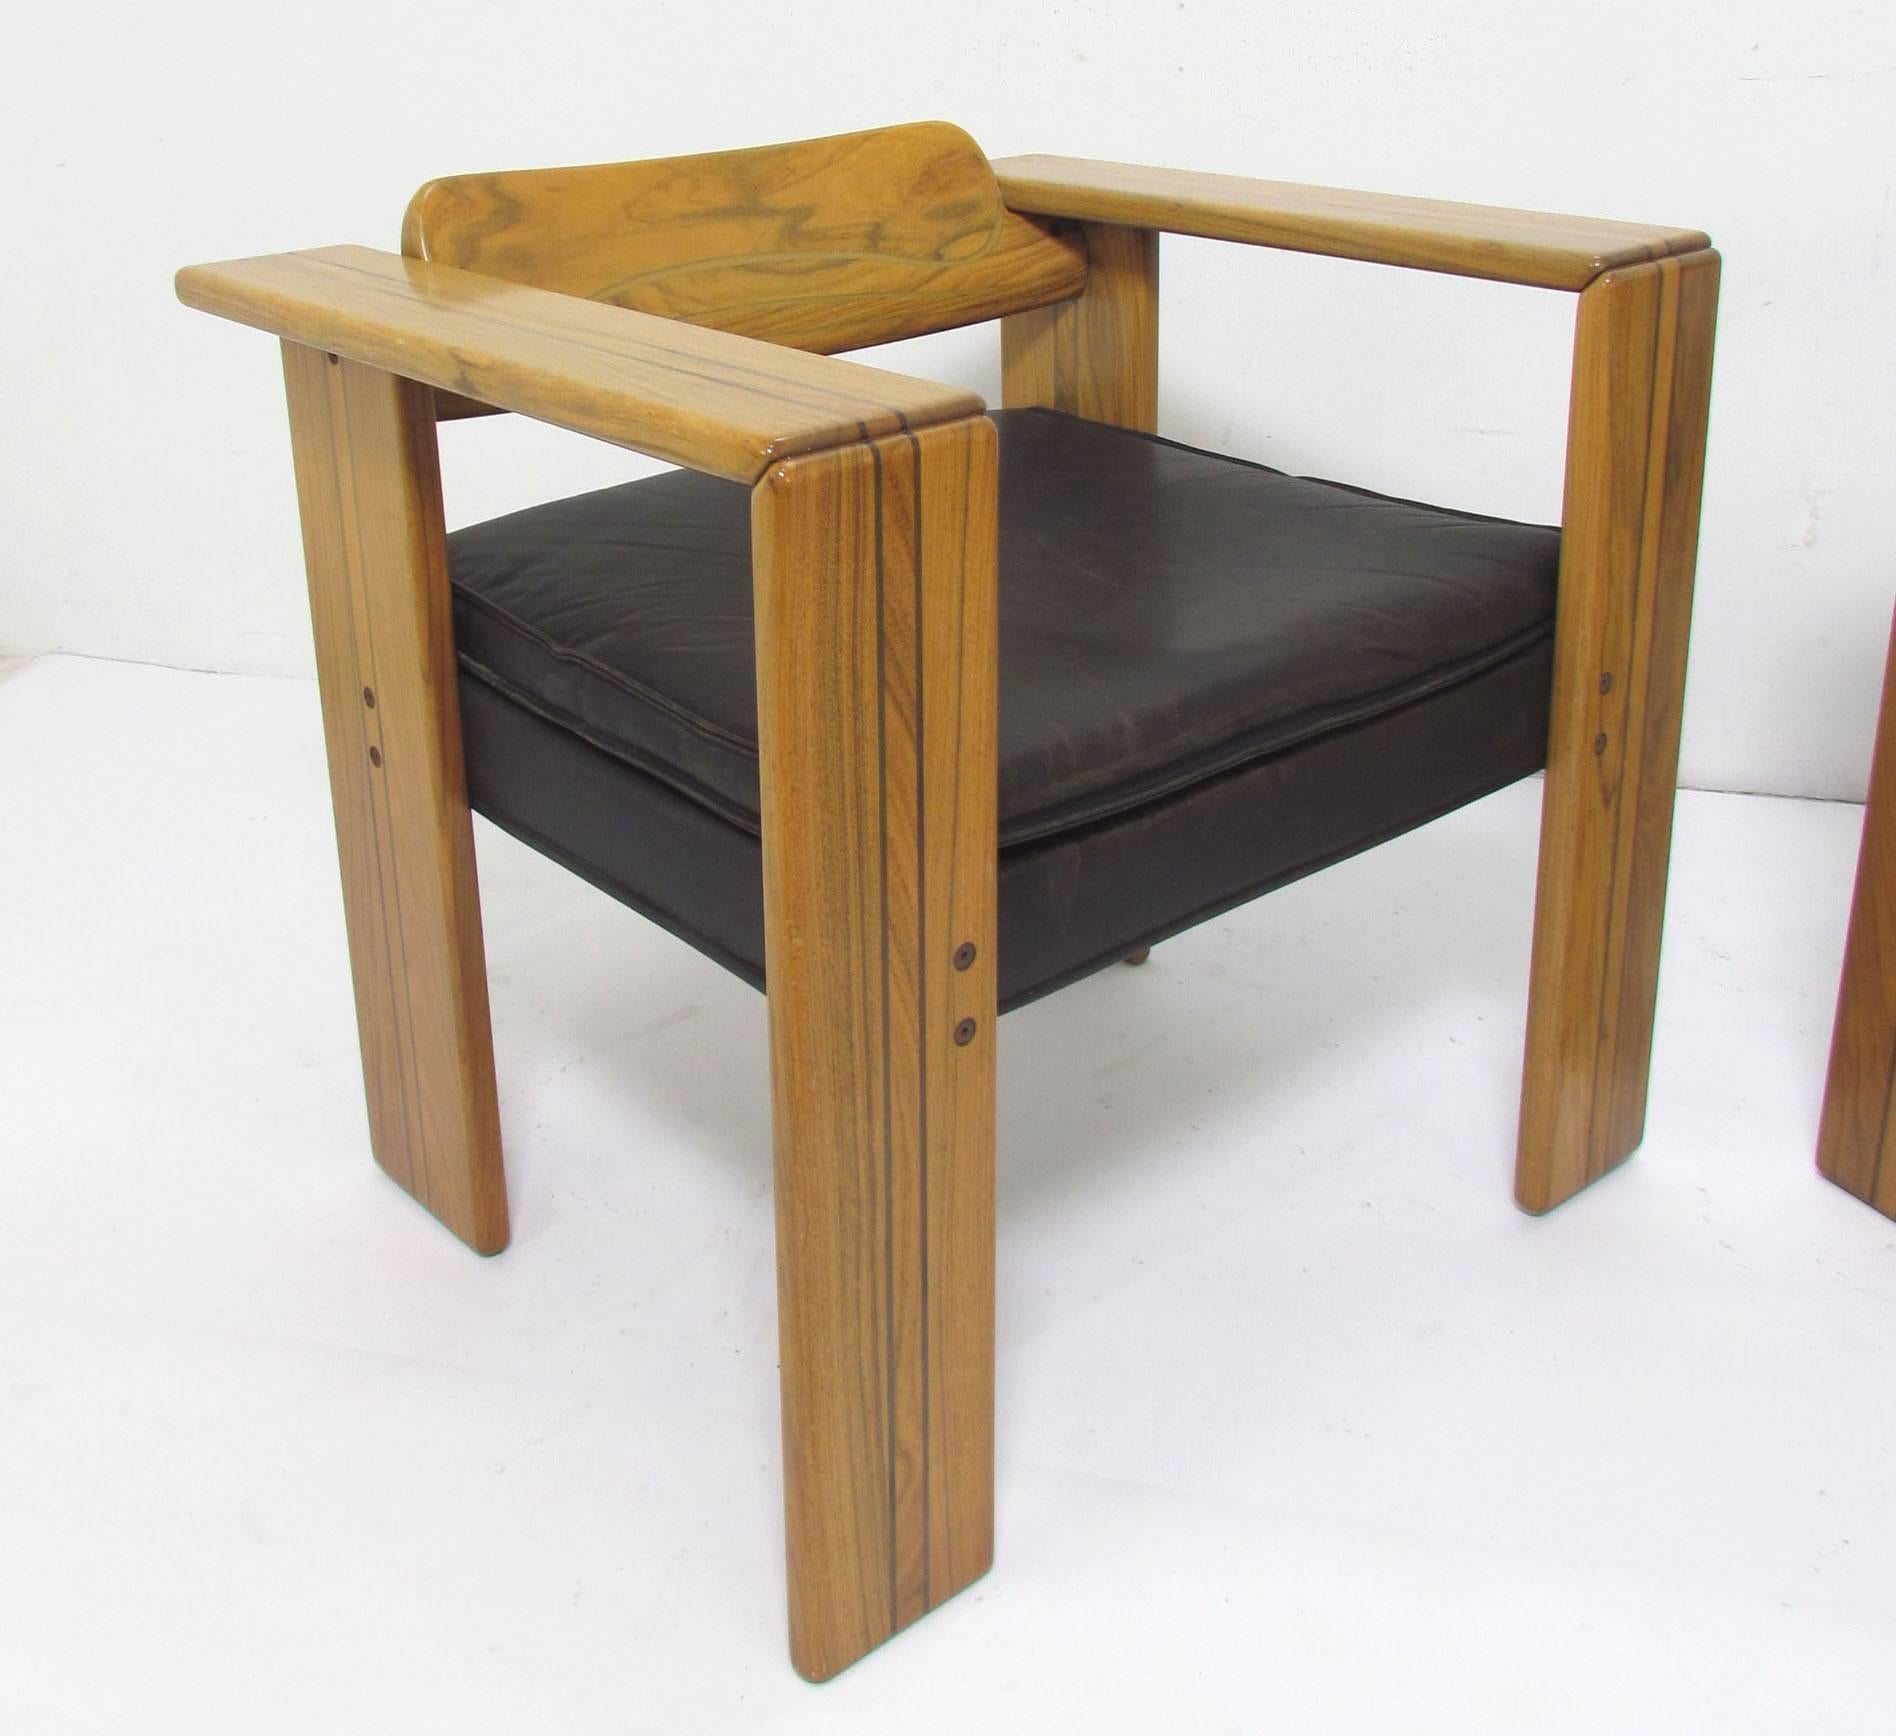 Pair of generously proportioned arm chairs of inlaid walnut, original leather seat cushions, designed by Afra and Tobia Scarpa for the Artona series by Maxalto, Italy, circa 1970s. 

Price is for the pair. 

Measures: Arm height is 25